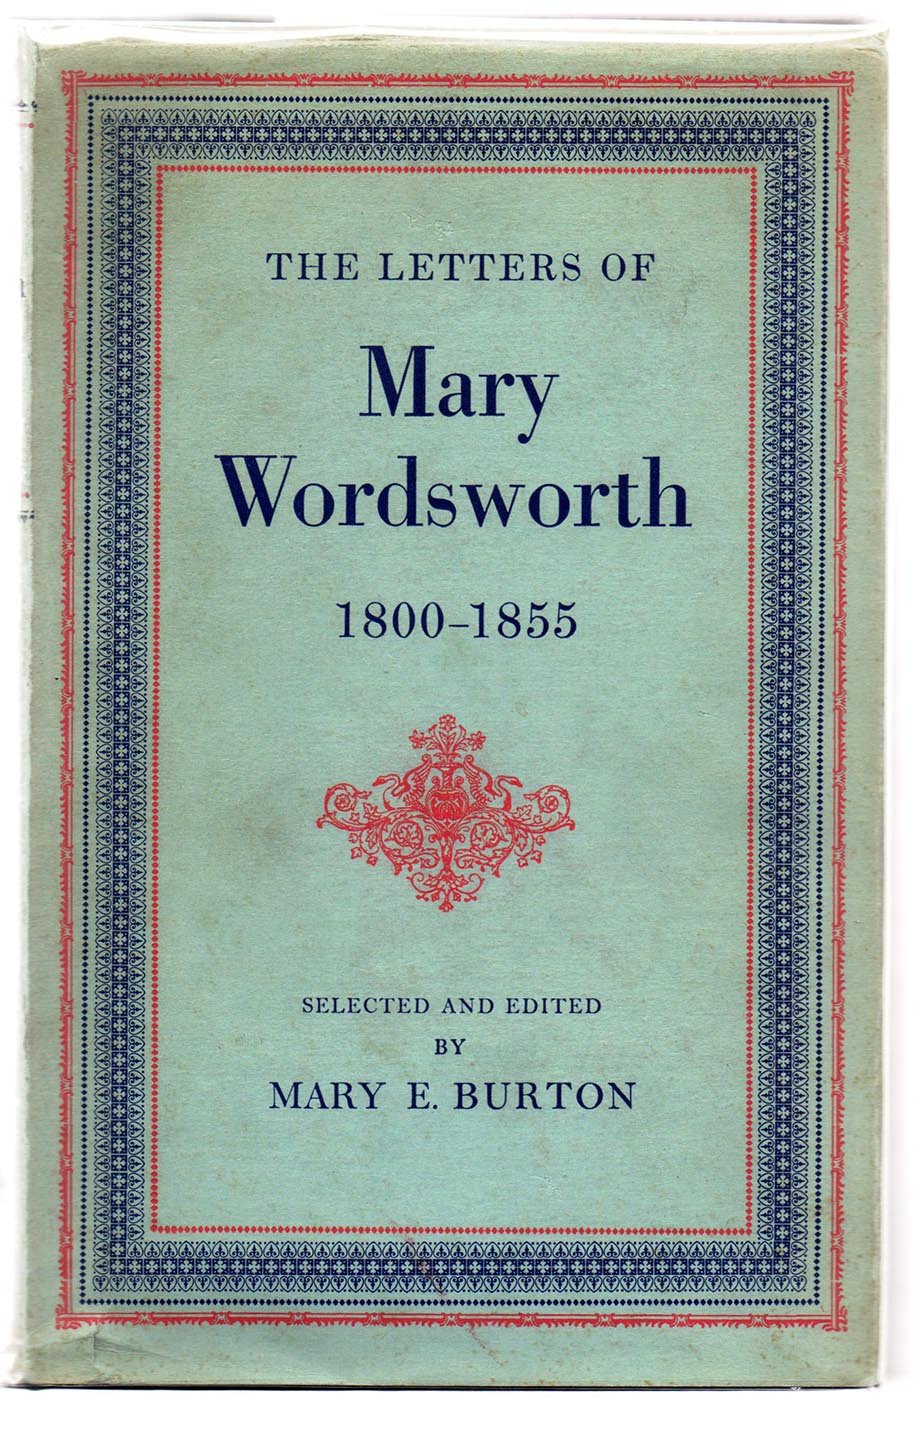 The Letters of Mary Wordsworth 1800-1855